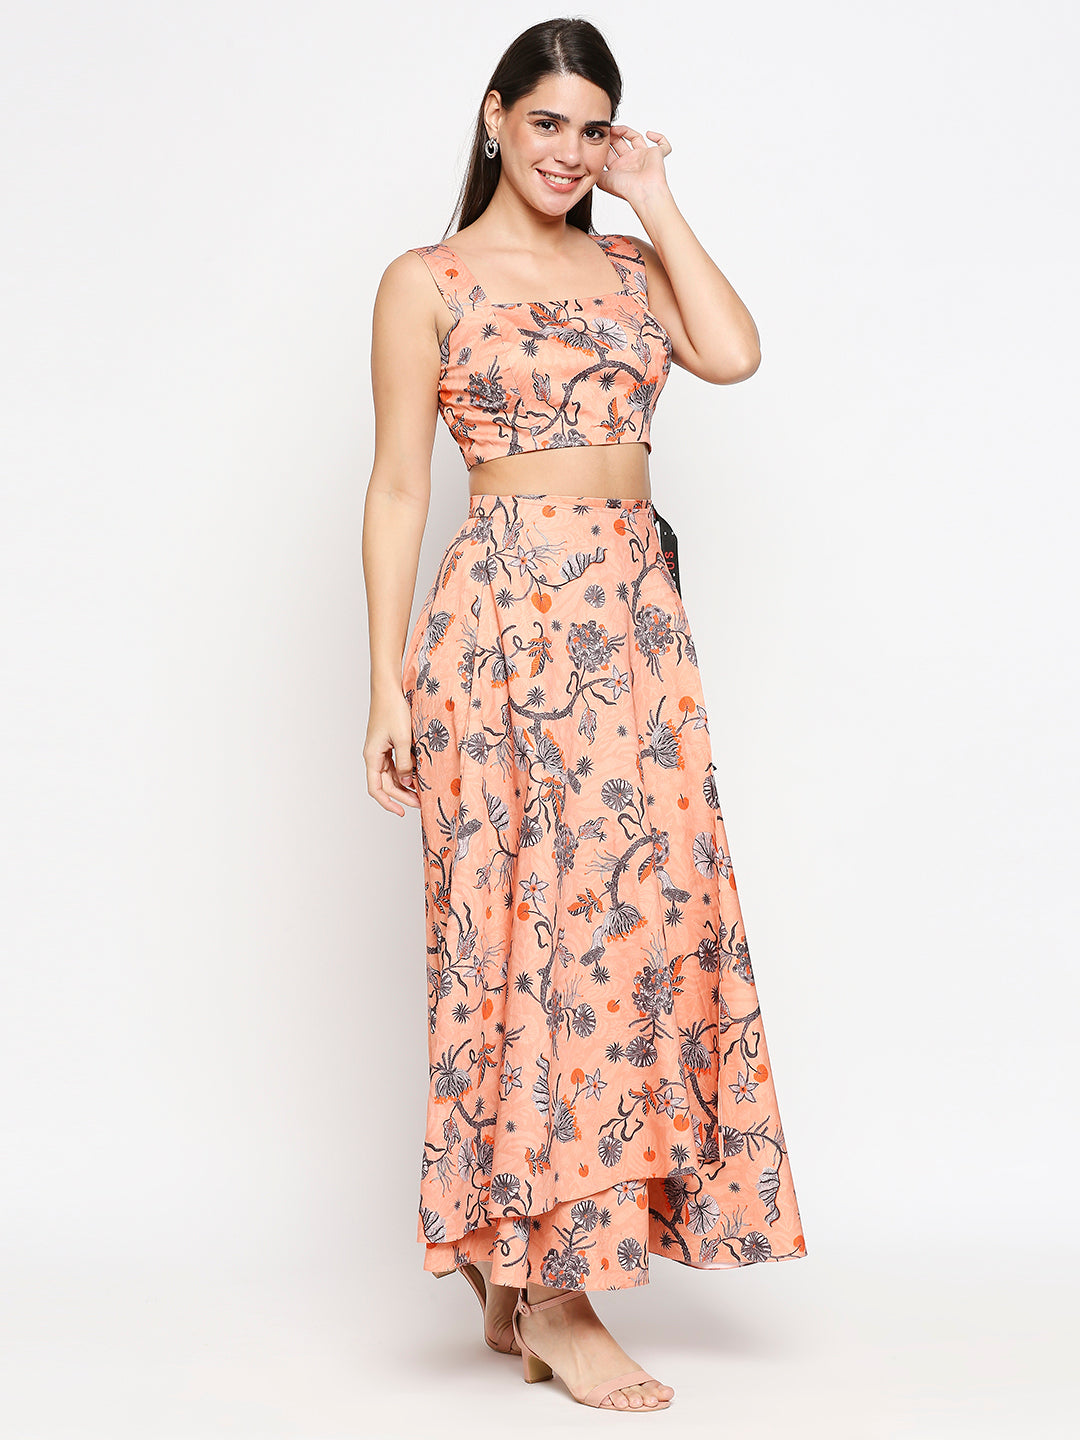 Floral Printed Cotton Twill Bustier Top With Floral Printed Skirt